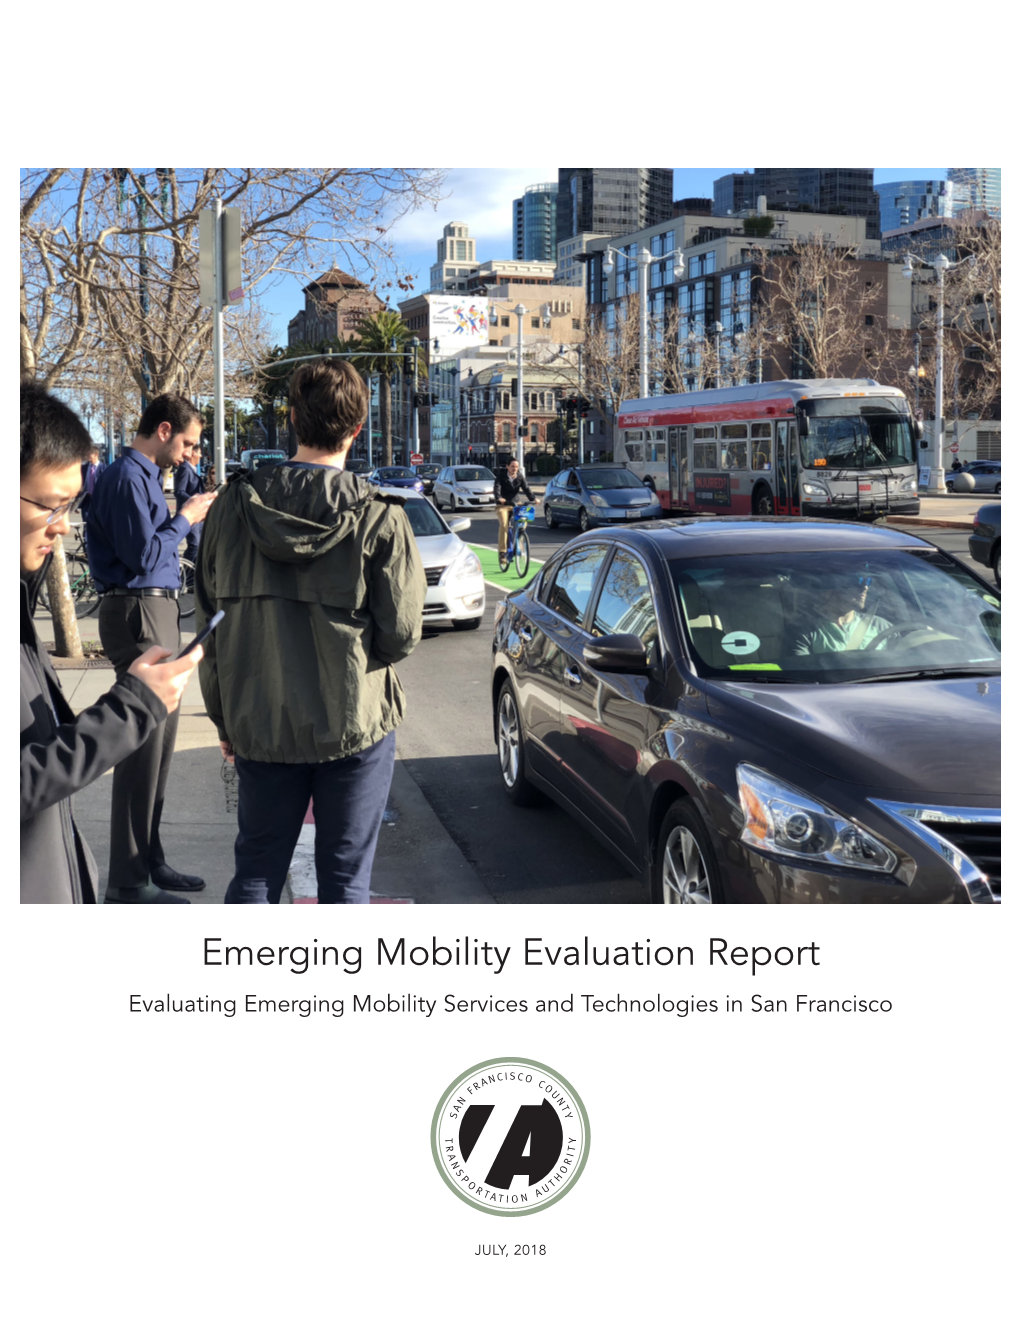 Emerging Mobility Evaluation Report, 2018